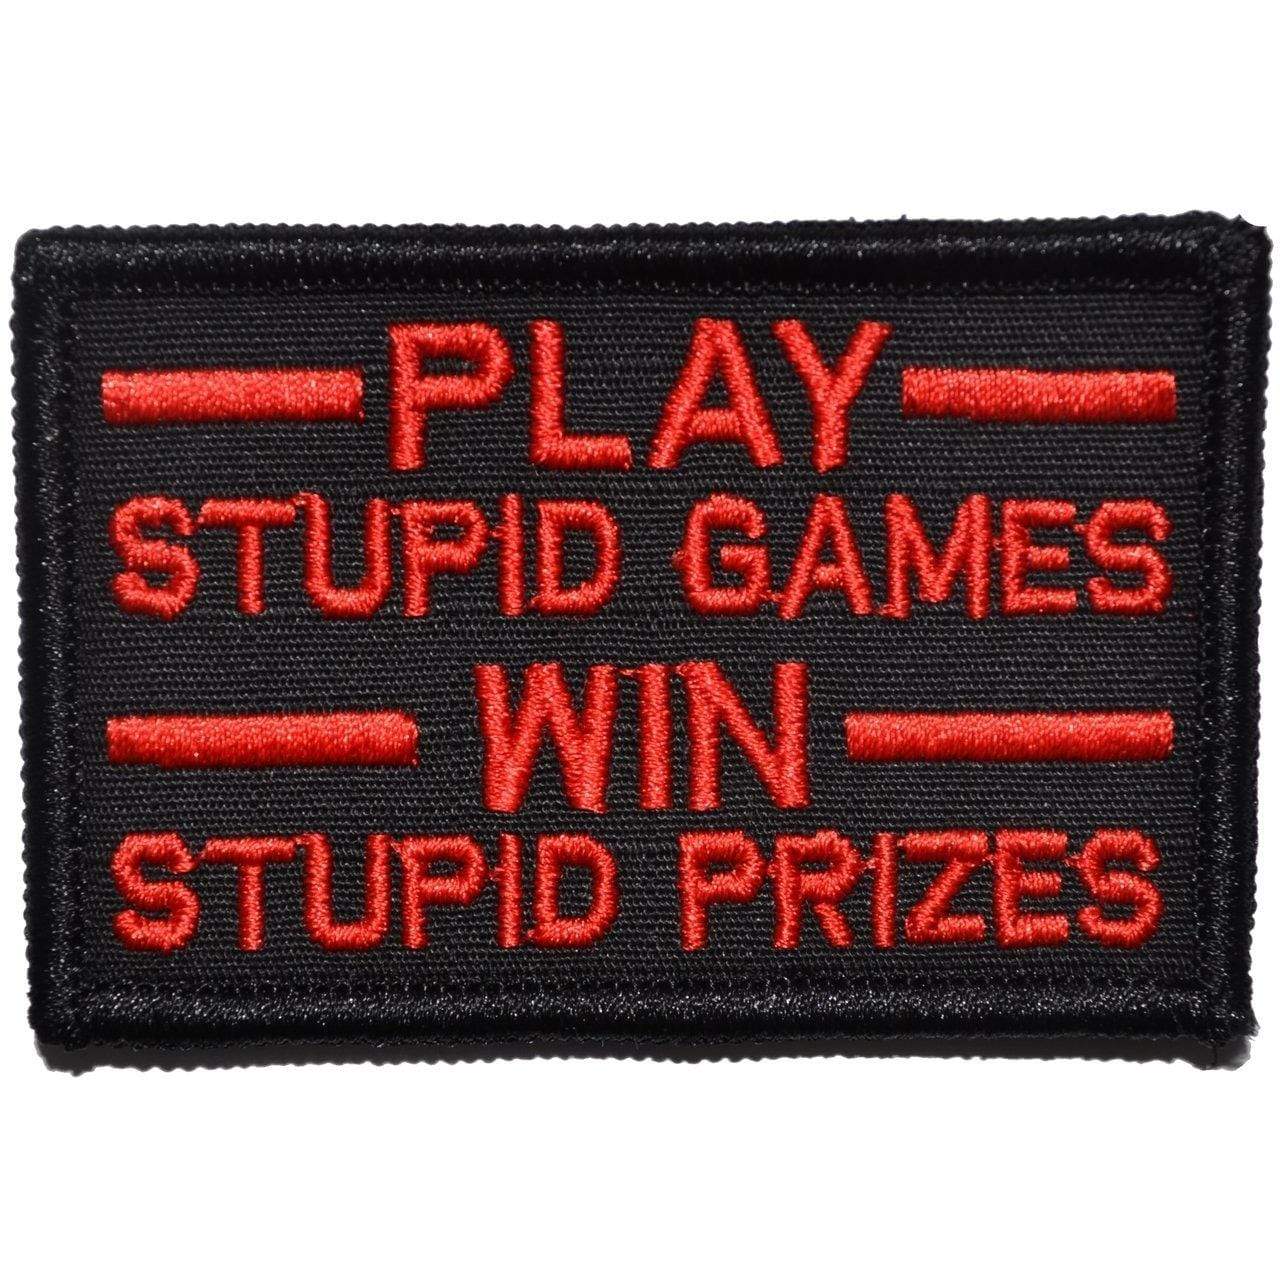 Tactical Gear Junkie Patches Black w/ Red Play Stupid Games, Win Stupid Prizes - 2x3 Patch